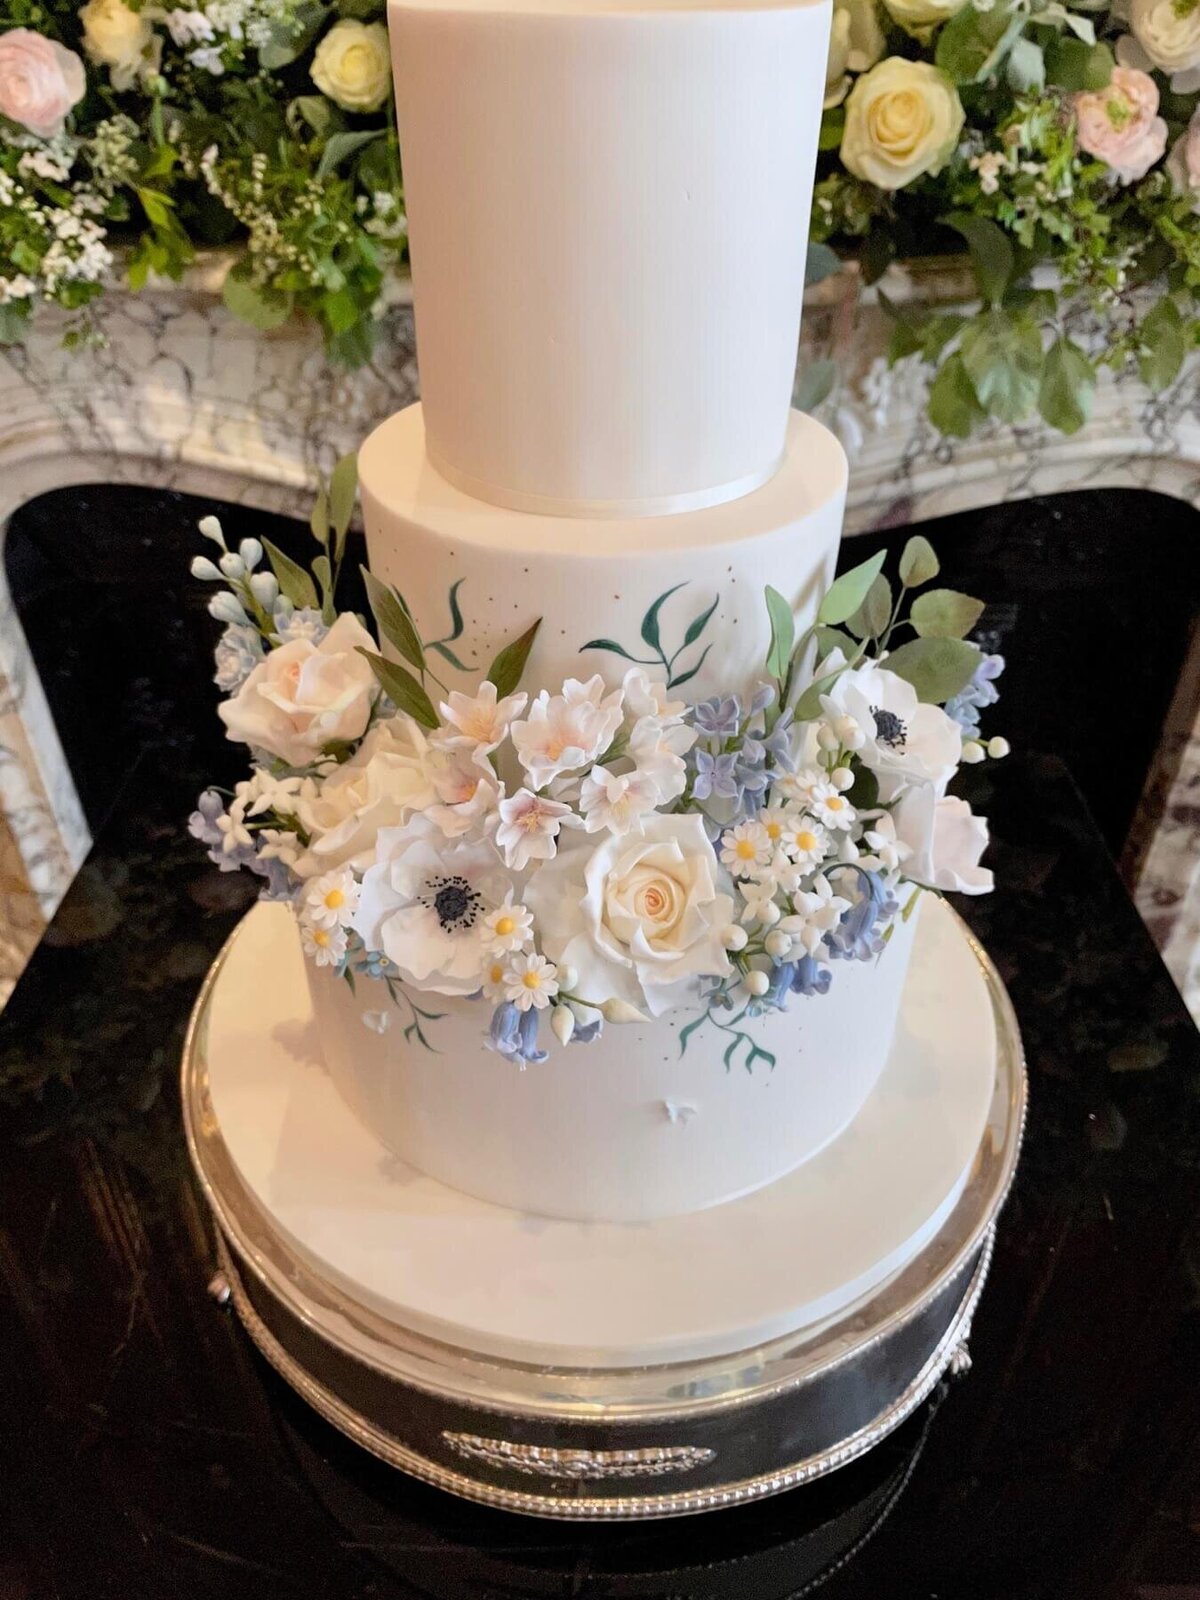 A two tier wedding cake with lots of sugar flowers covering the second tier